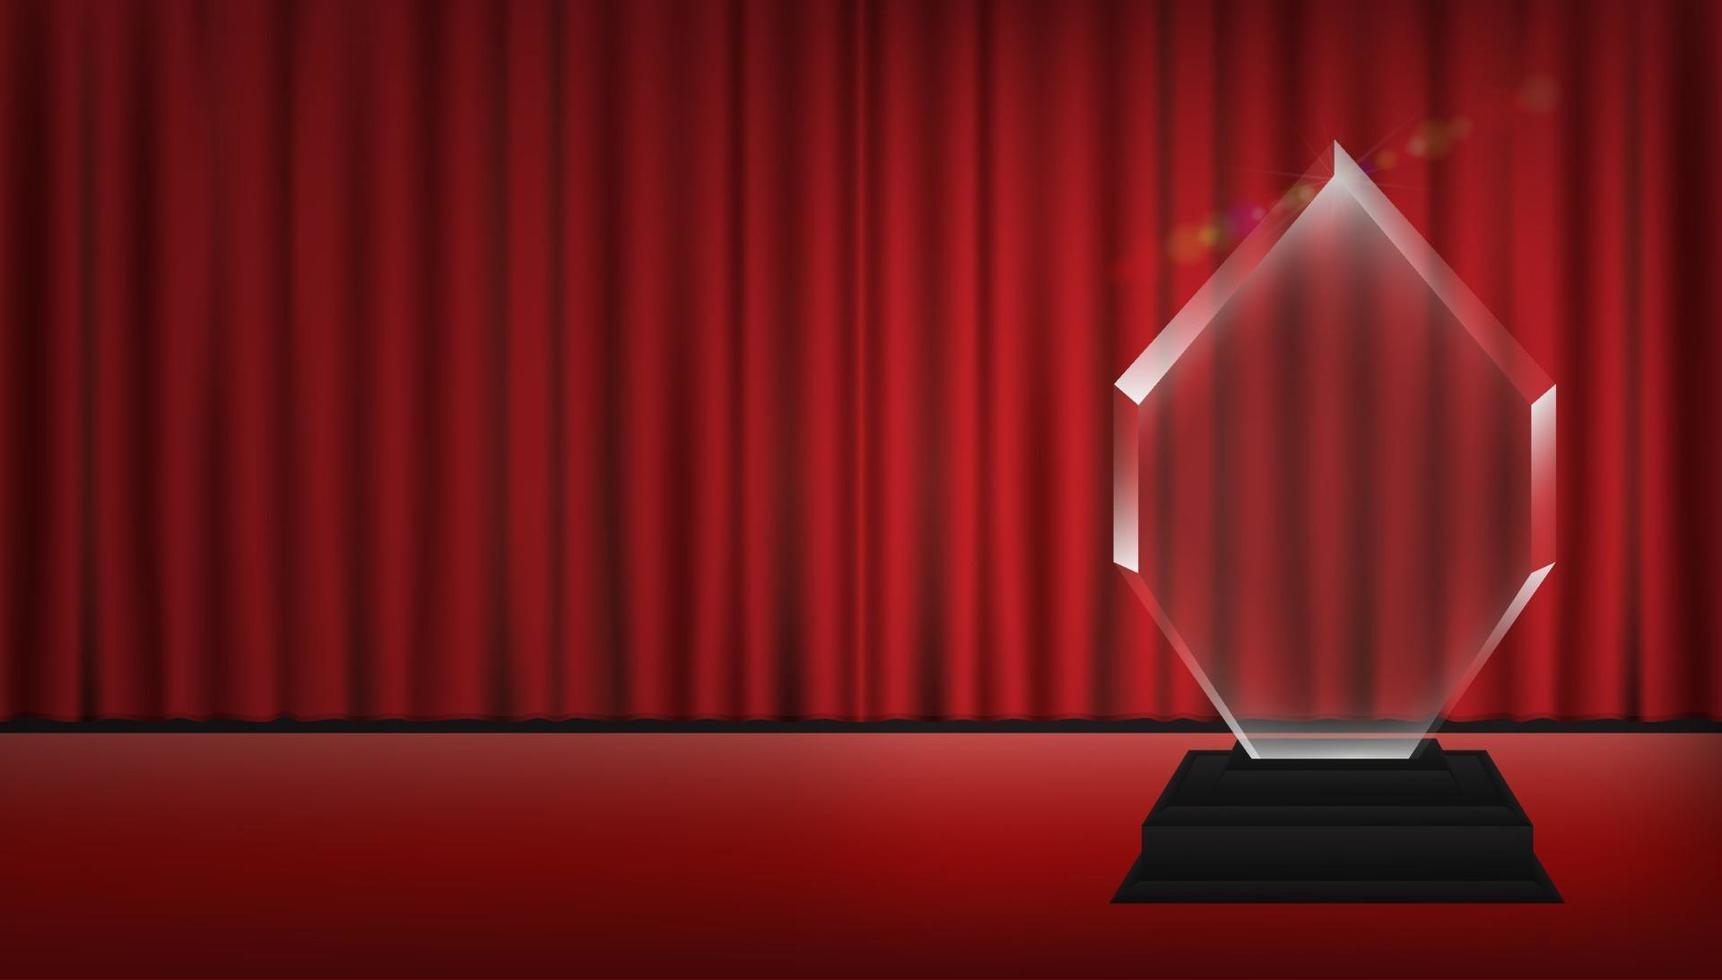 acrylic trophy with red curtain stage background vector